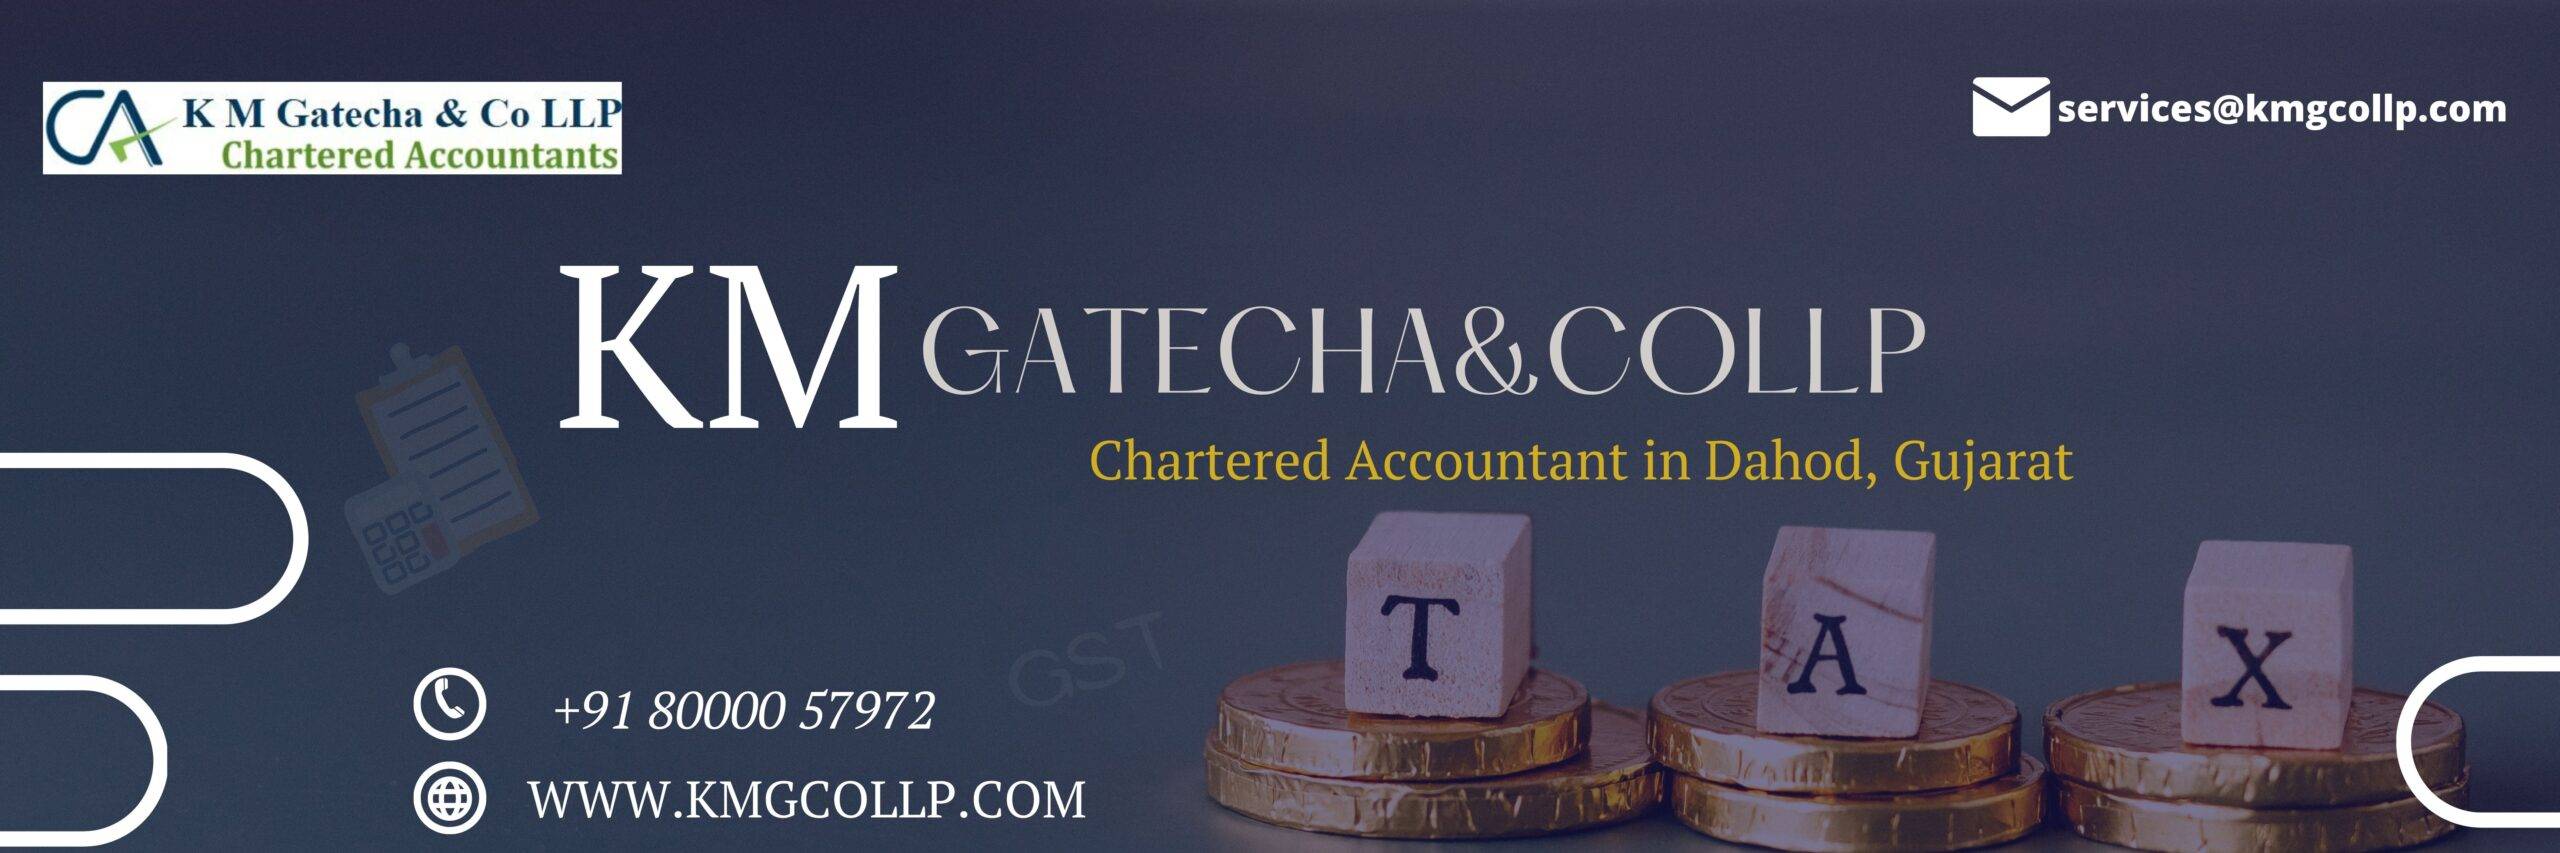 ca chartered accountant in Dahod